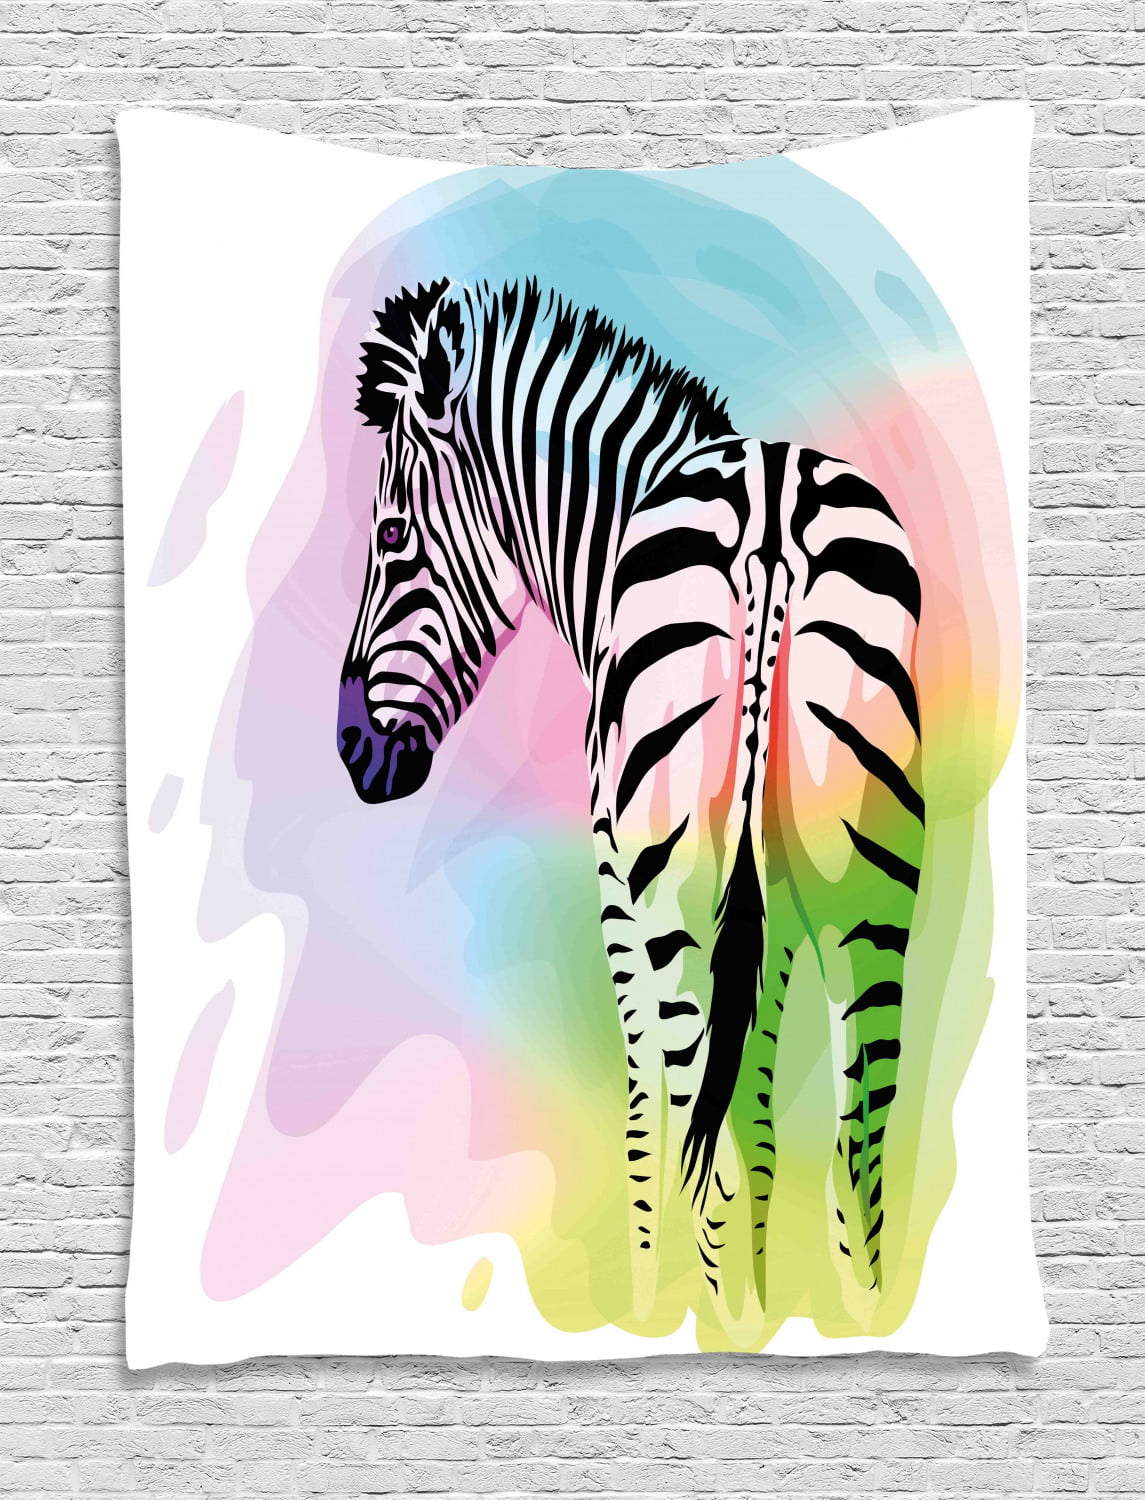 Rainbow Zebra Tapestry, Watercolor Effect Pastel Tone Striped Animal  Silhouette, Wall Hanging for Bedroom Living Room Dorm Decor, 40W X 60L  Inches, Charcoal Grey and Multicolor, by Ambesonne 